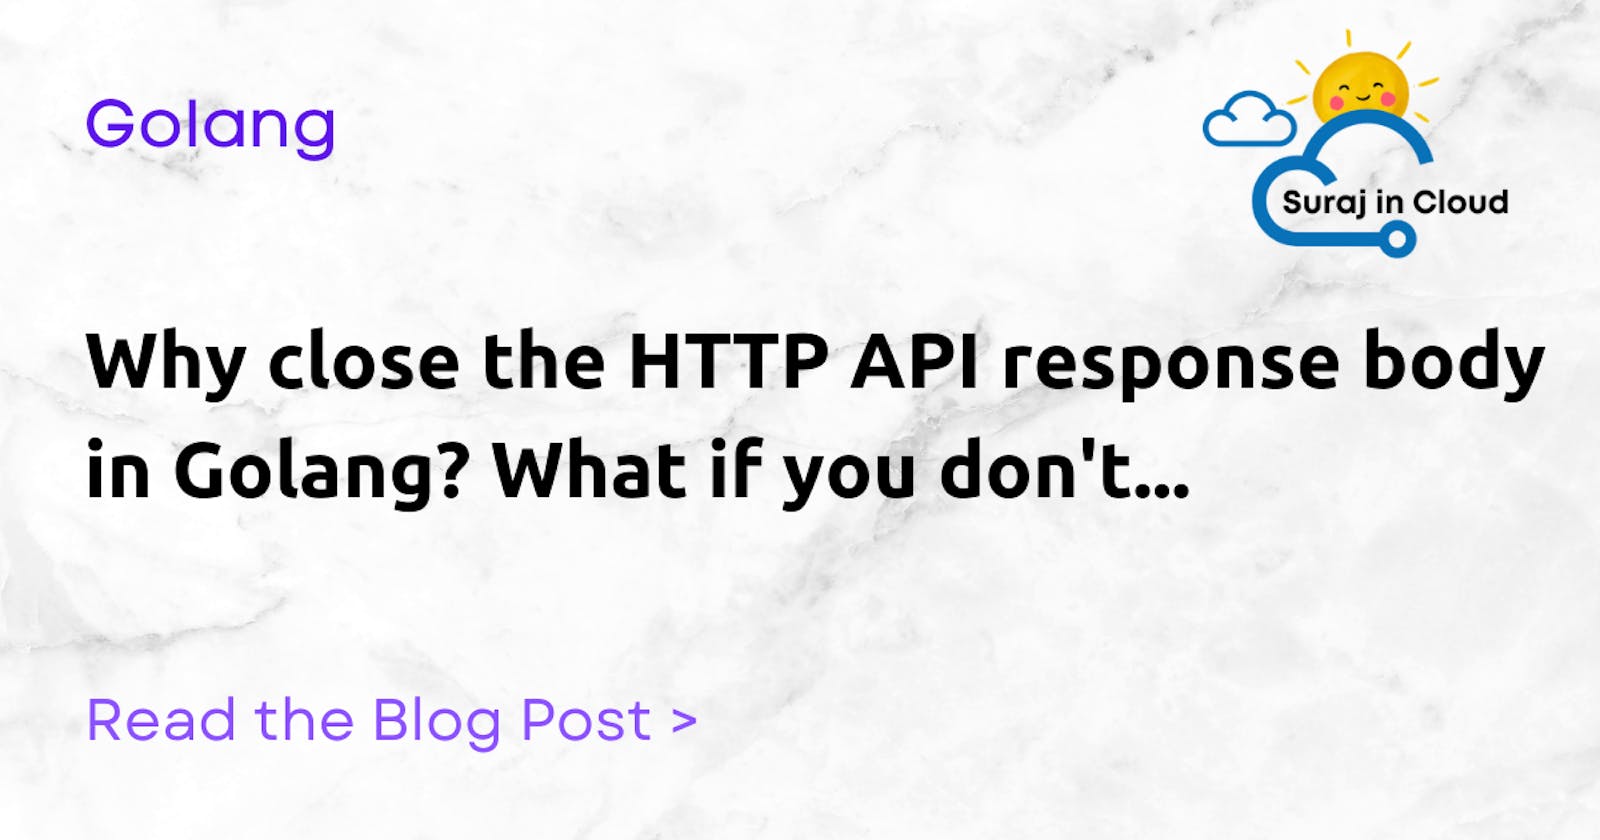 Why close the HTTP API response body in Golang? What if you don't...